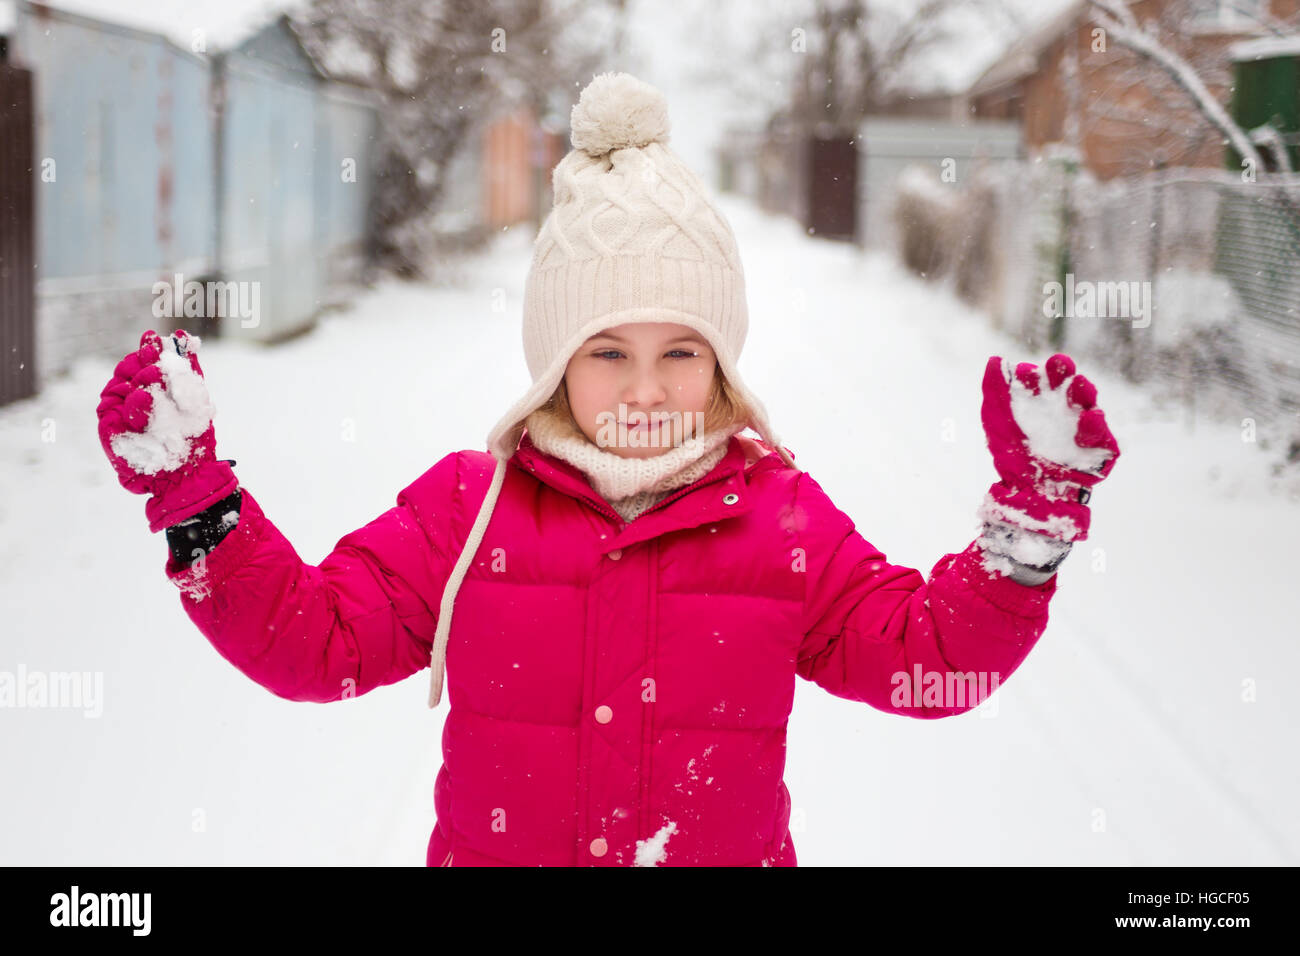 Adorable child girl playing outdoor with snow Stock Photo